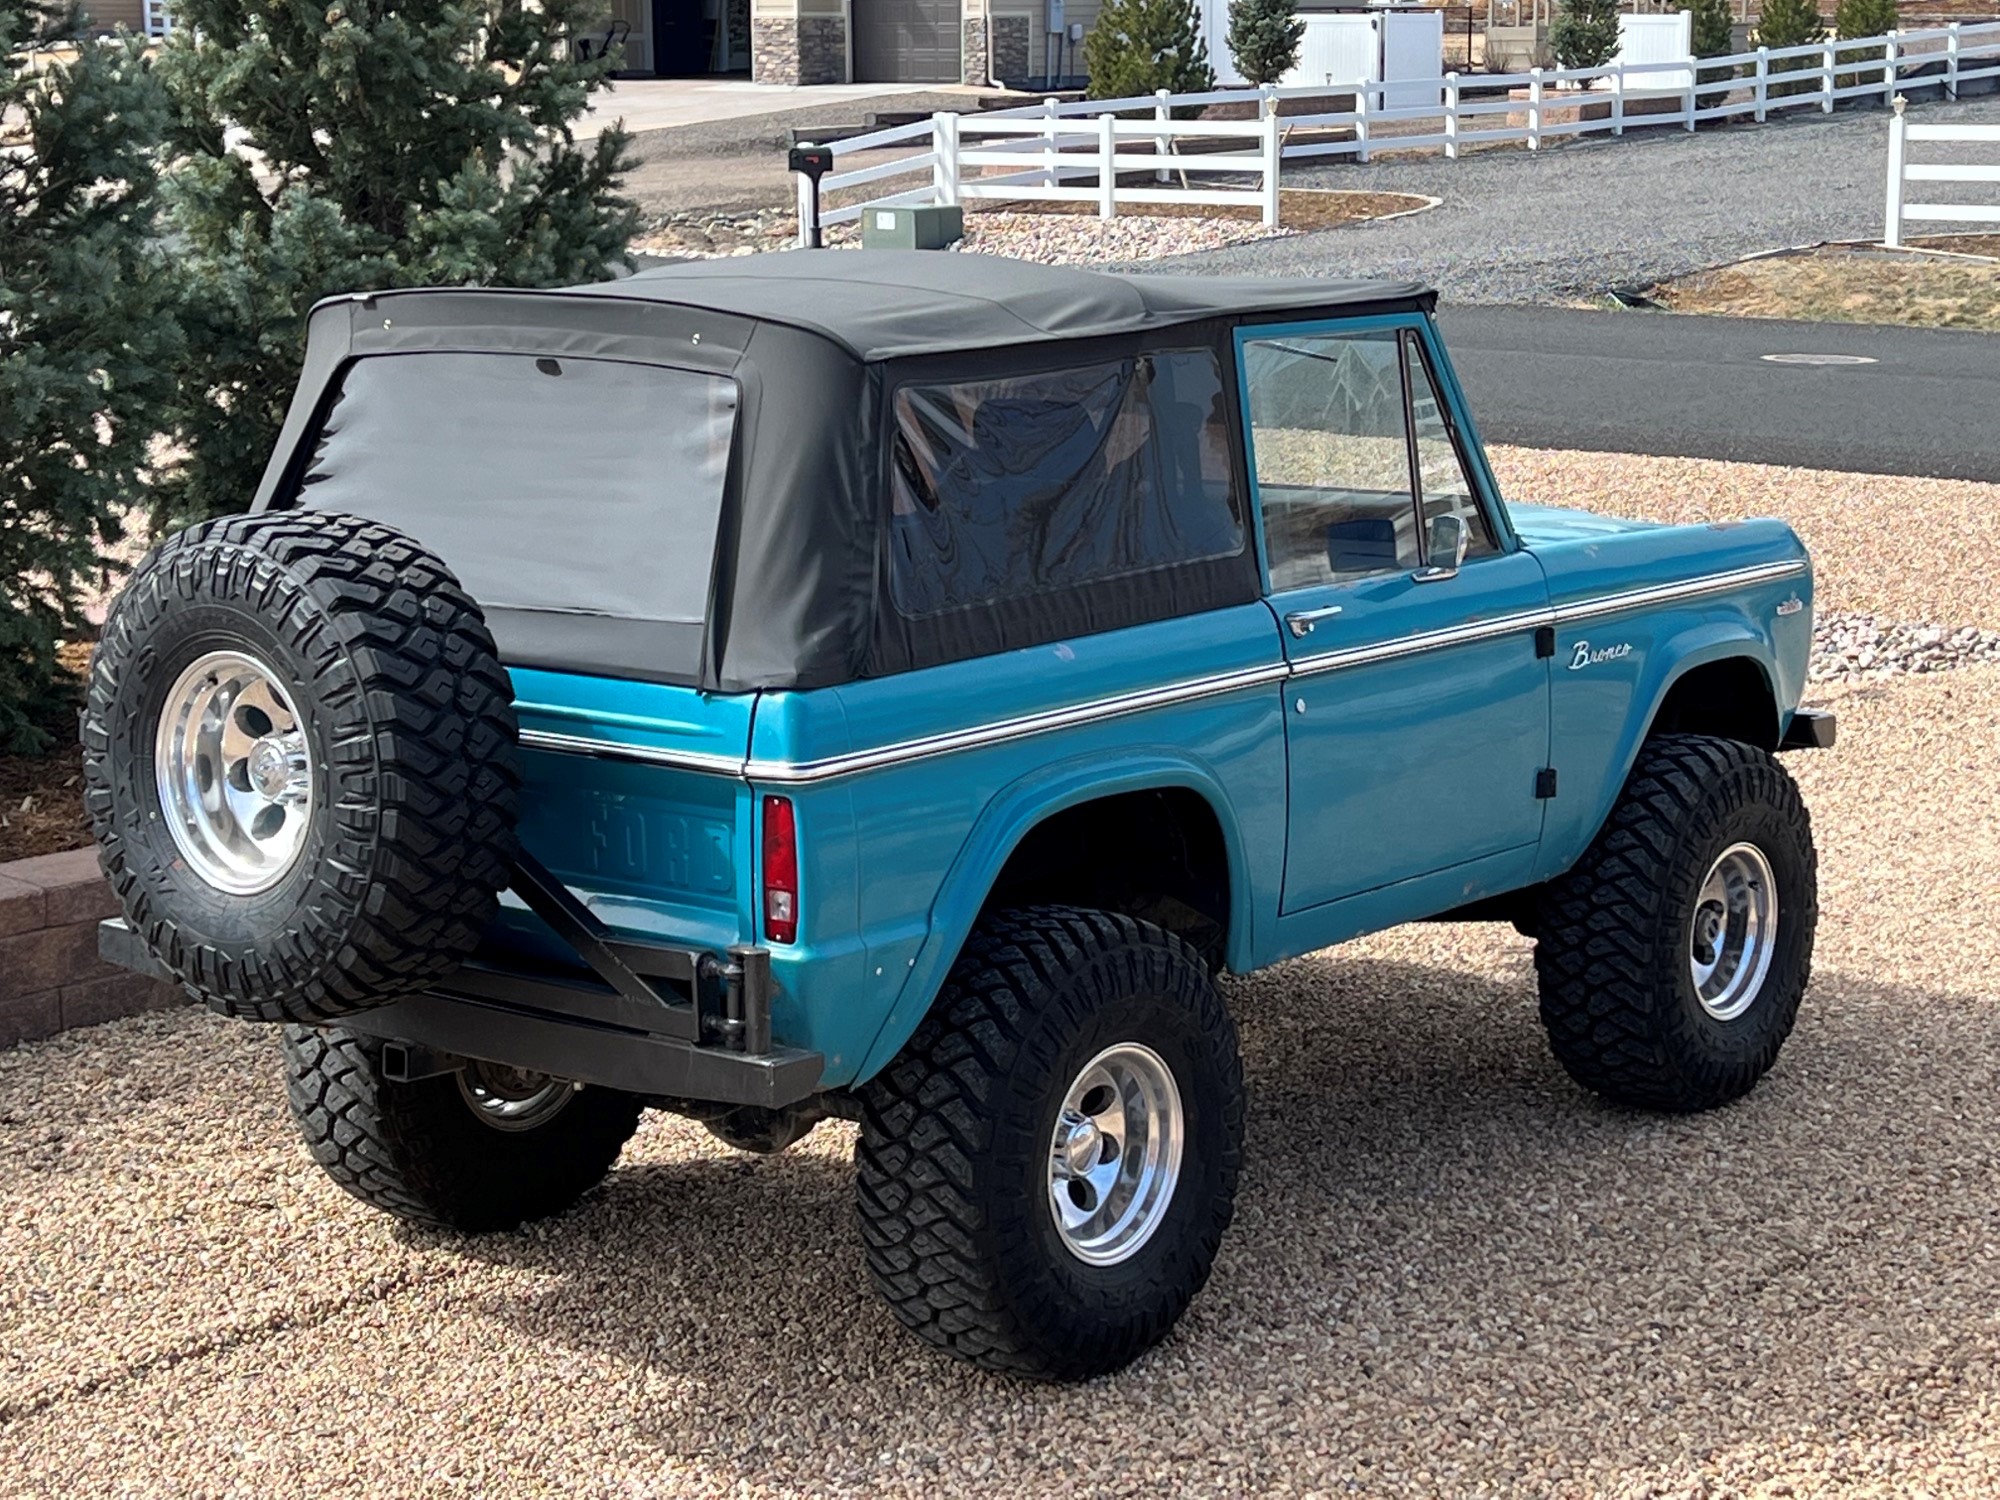 Ford Bronco 2 Doors and 3 Pedals topside